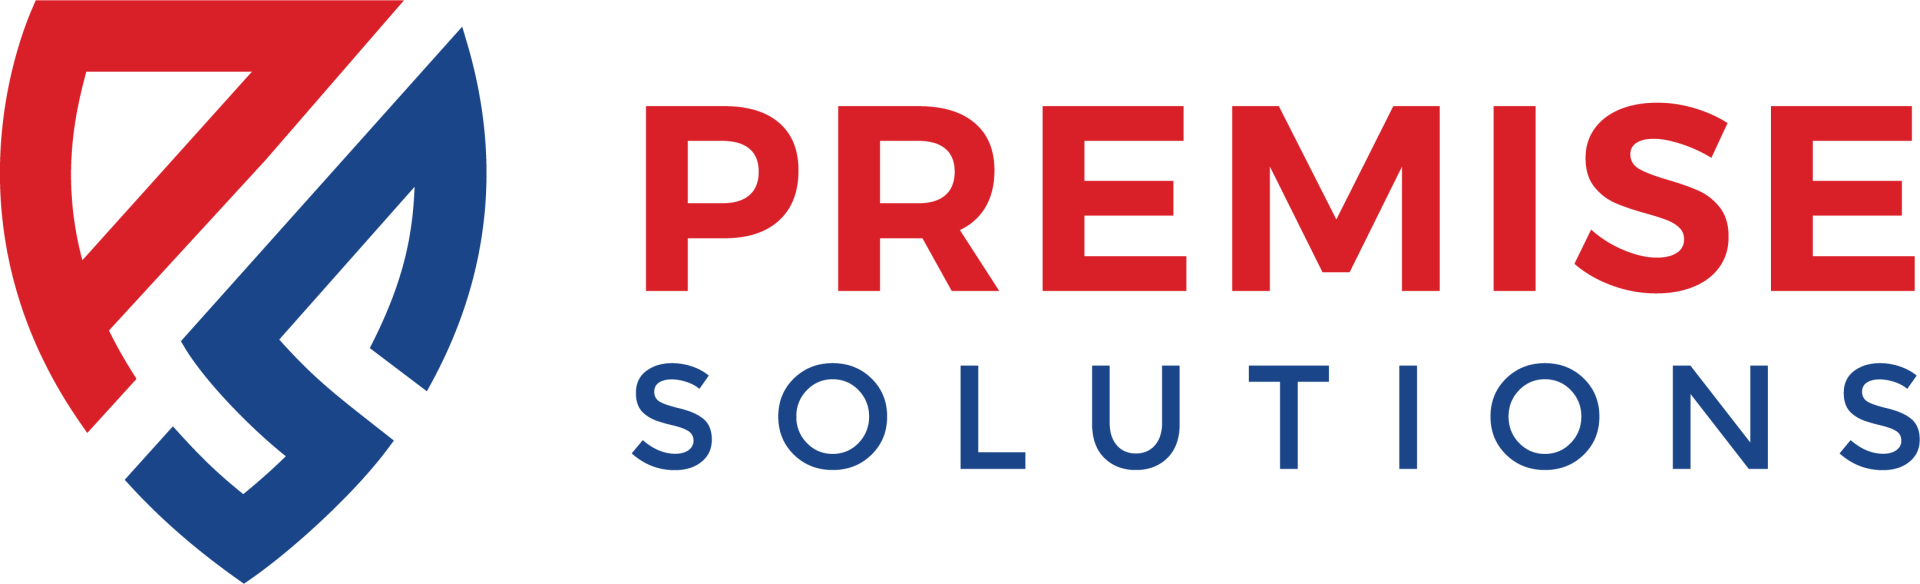 Premise Solutions Technology Converged logo